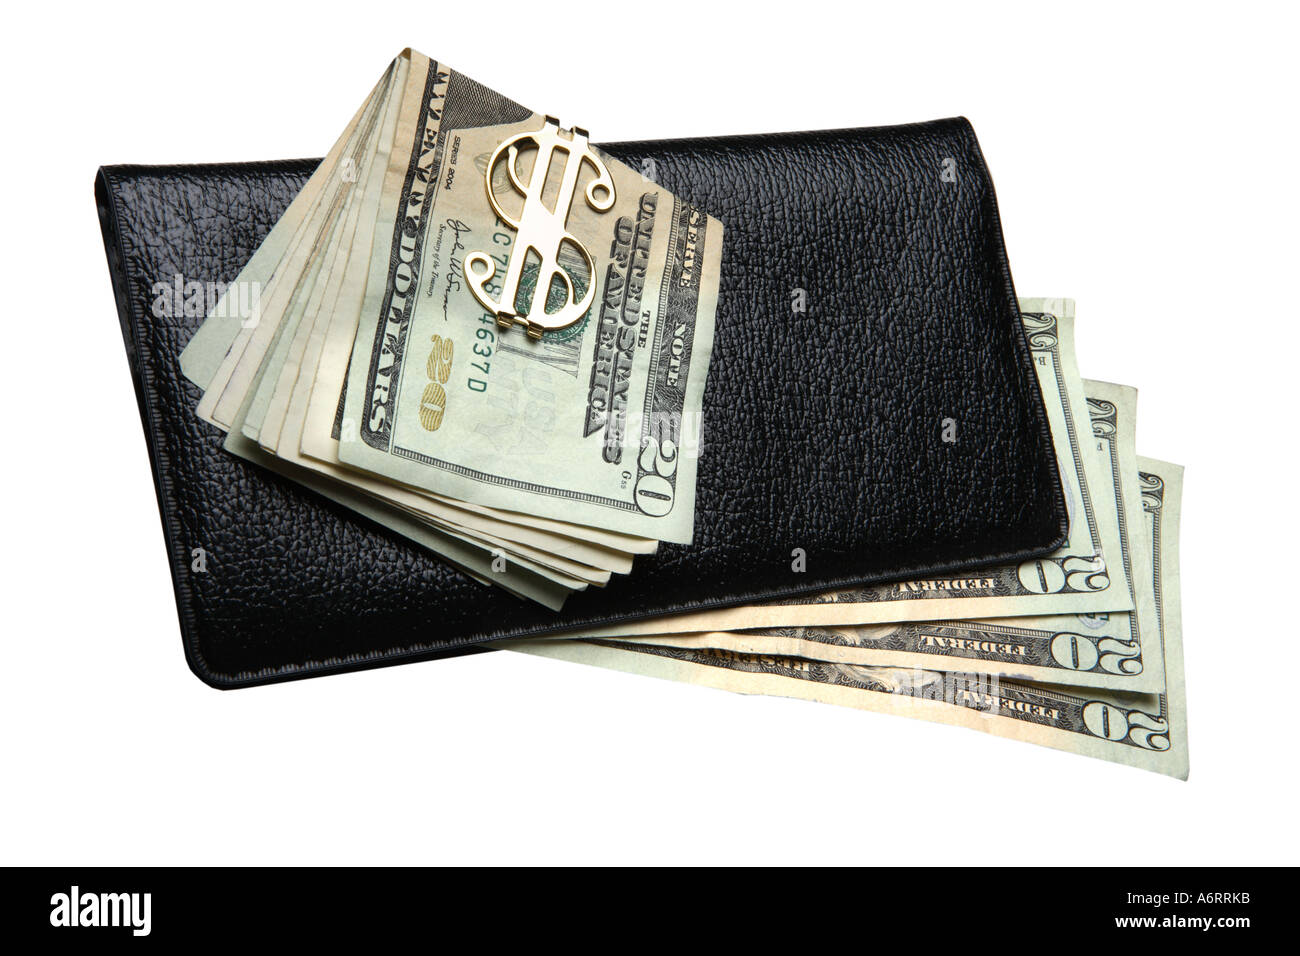 Wallet and money clip with cash Stock Photo